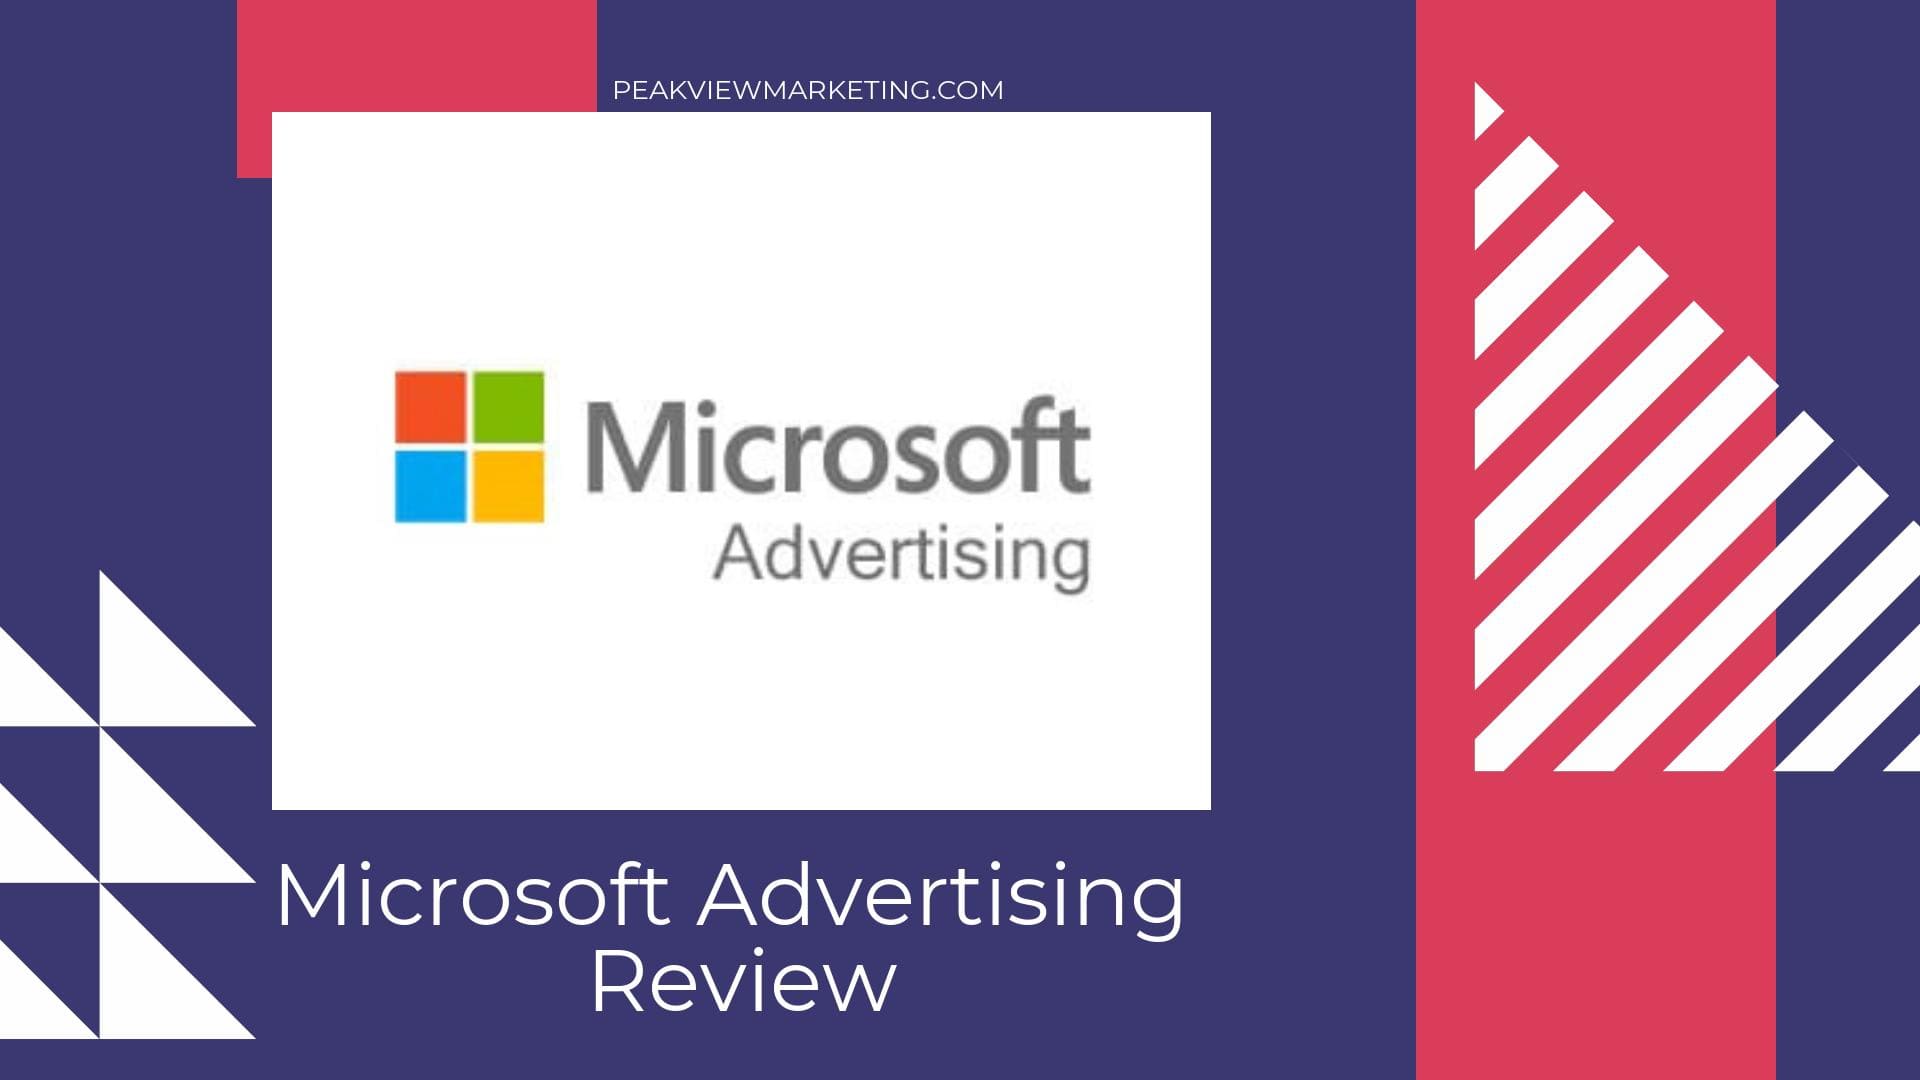 Microsoft Advertising Review Image